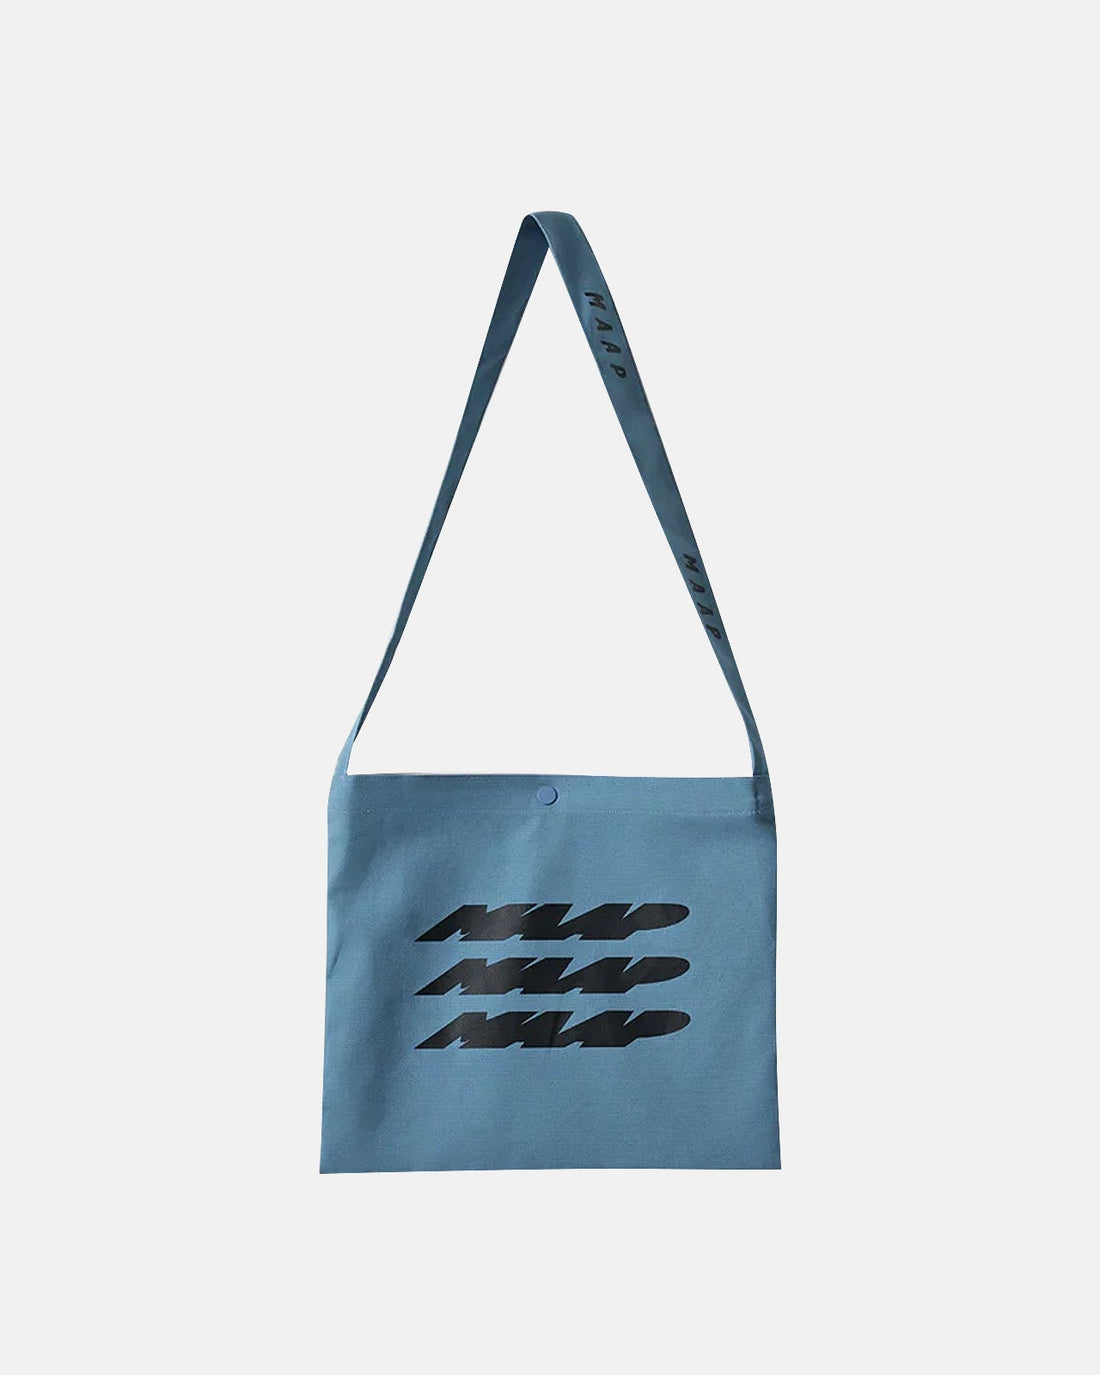 Eclipse Musette - MAAP